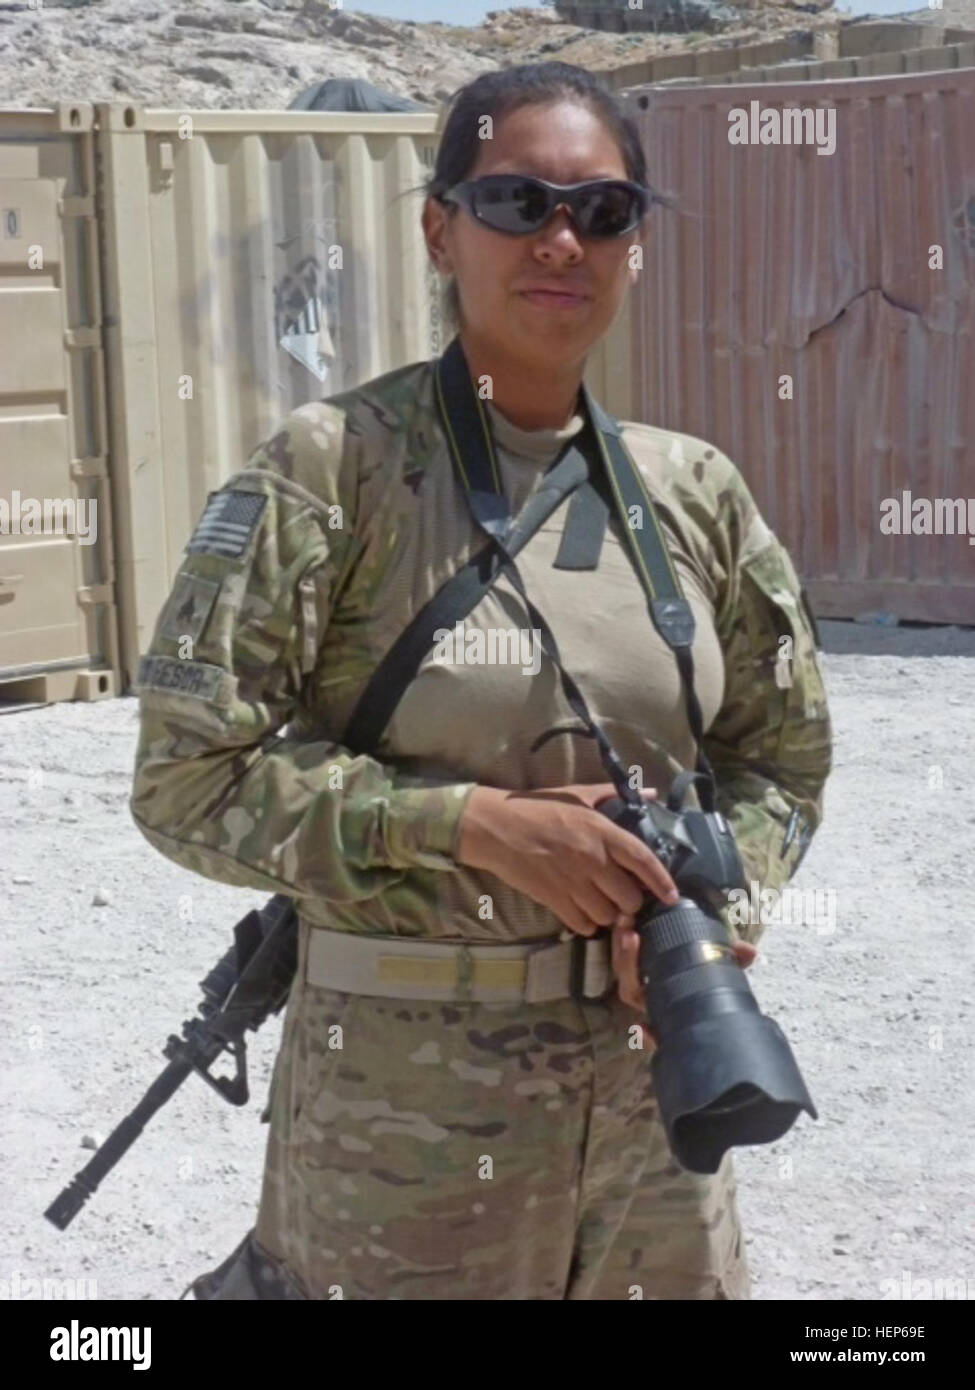 Staff Sgt. Nazly Confesor is a public affairs journalist for the 200th Military Police Command, now living in Washington with a deployment to southern Afghanistan in 2011-2012 to cover stories of Soldiers in combat. This photo of her was taken at Forward Operating Base Masum Ghar in October, 2011. She is one of the women interviewed to give a woman's perspective of what it's like to serve in the Army as a female Soldier. (Courtesy photo) Stepping into Women's combat boots 111001-A-XX000-001 Stock Photo